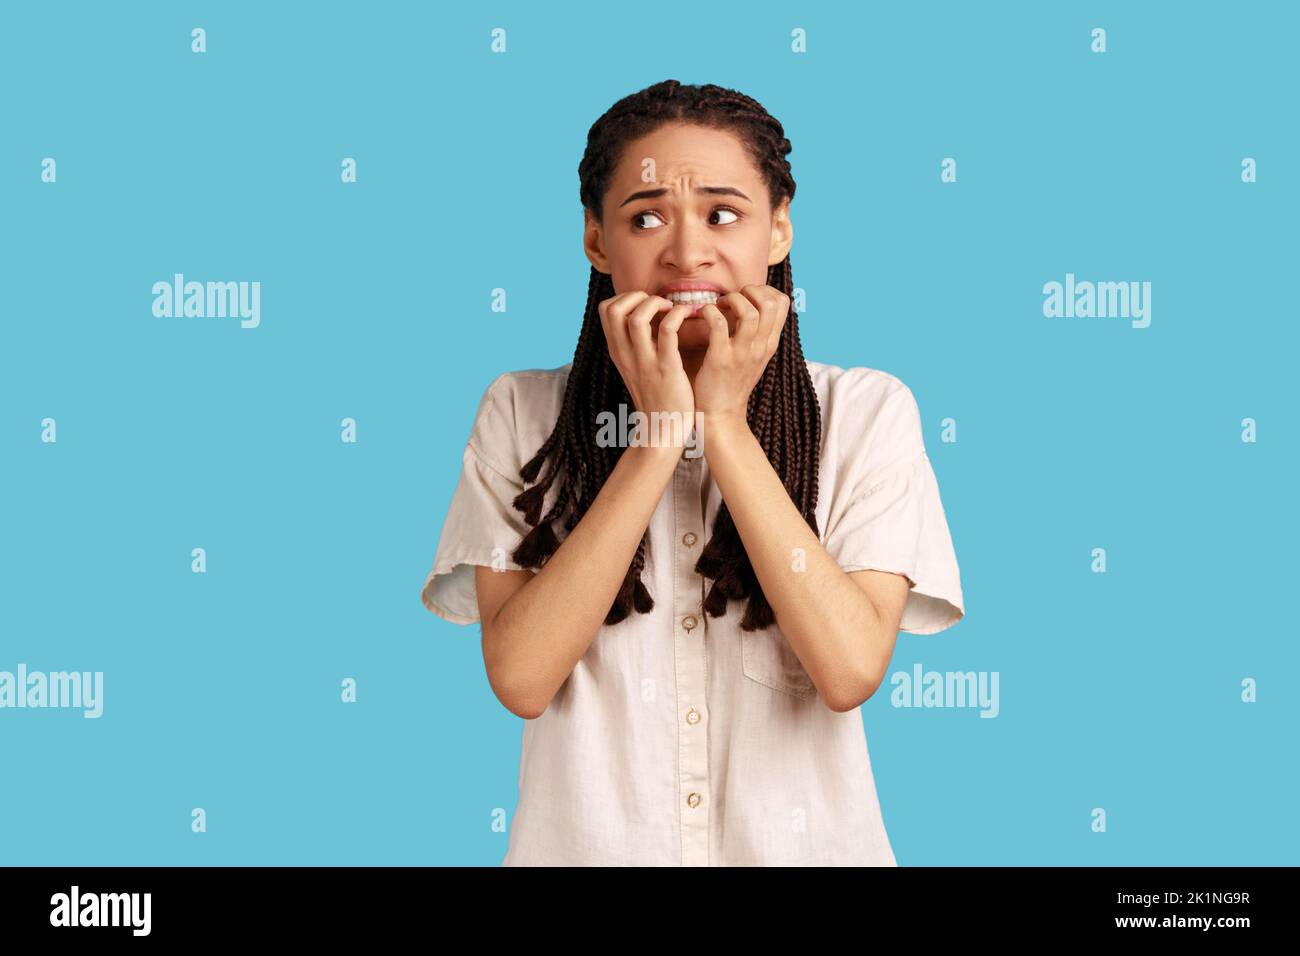 Portrait of puzzled woman with black dreadlocks has worried nervous expression, keeps hand on mouth, hears unexpected bad news, wearing white shirt. Indoor studio shot isolated on blue background. Stock Photo